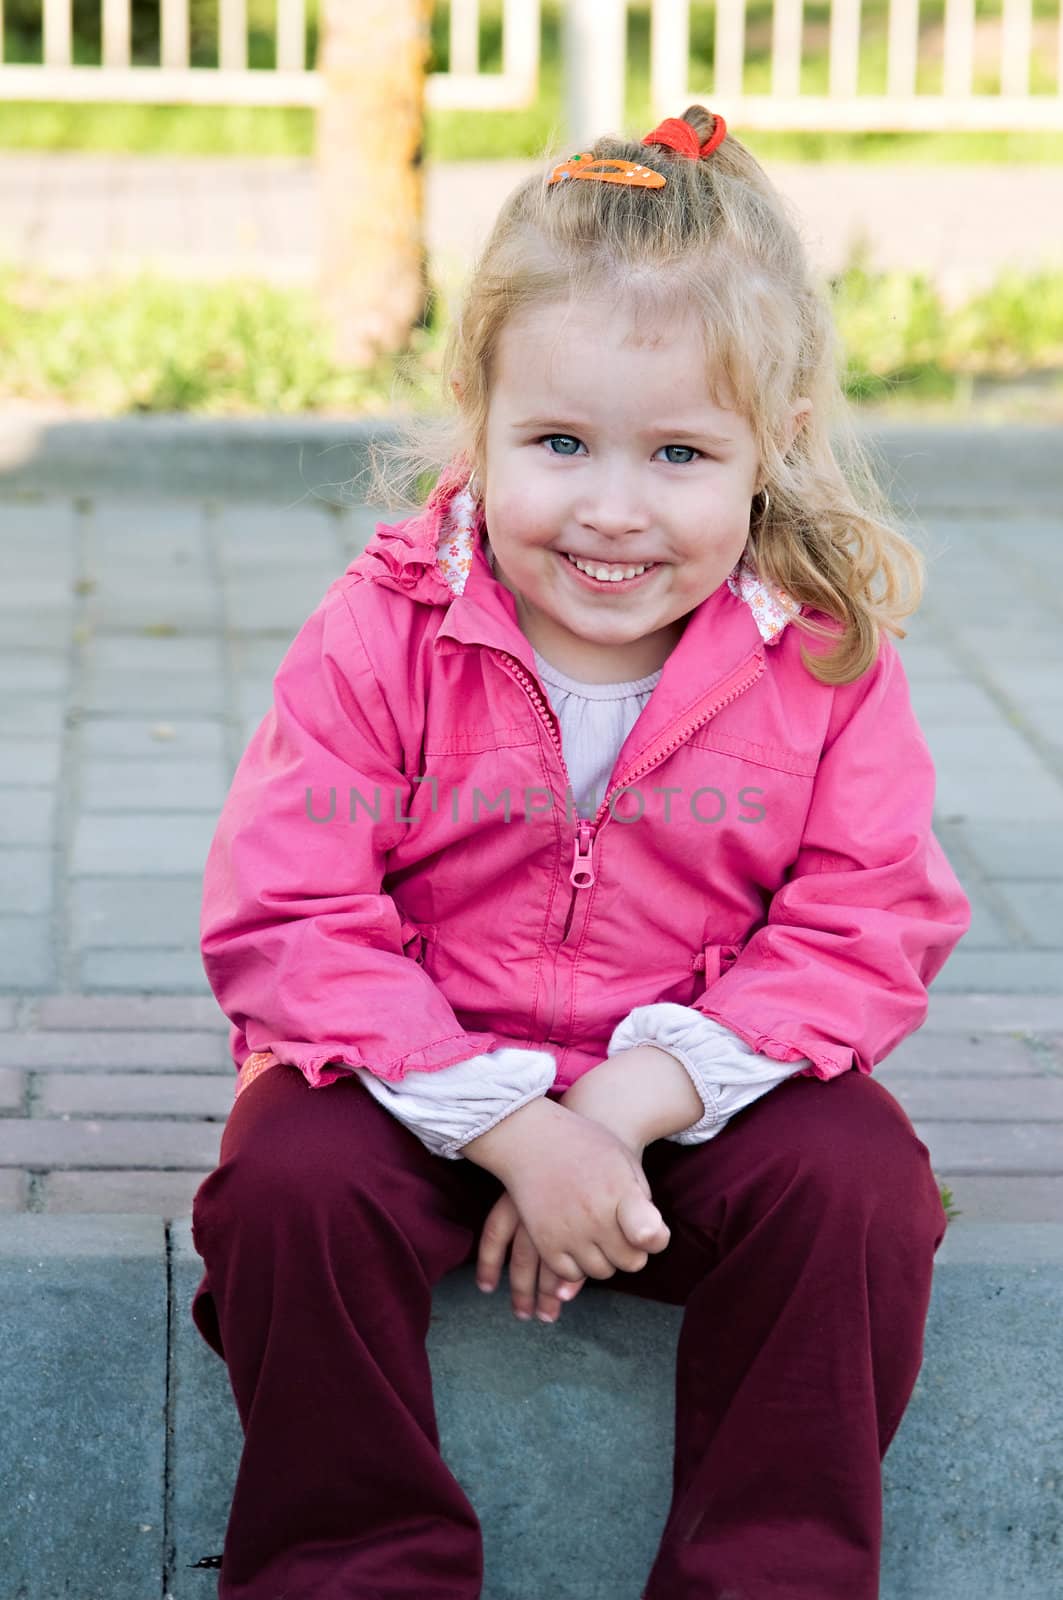 girl in a pink jacket, sitting and smiling